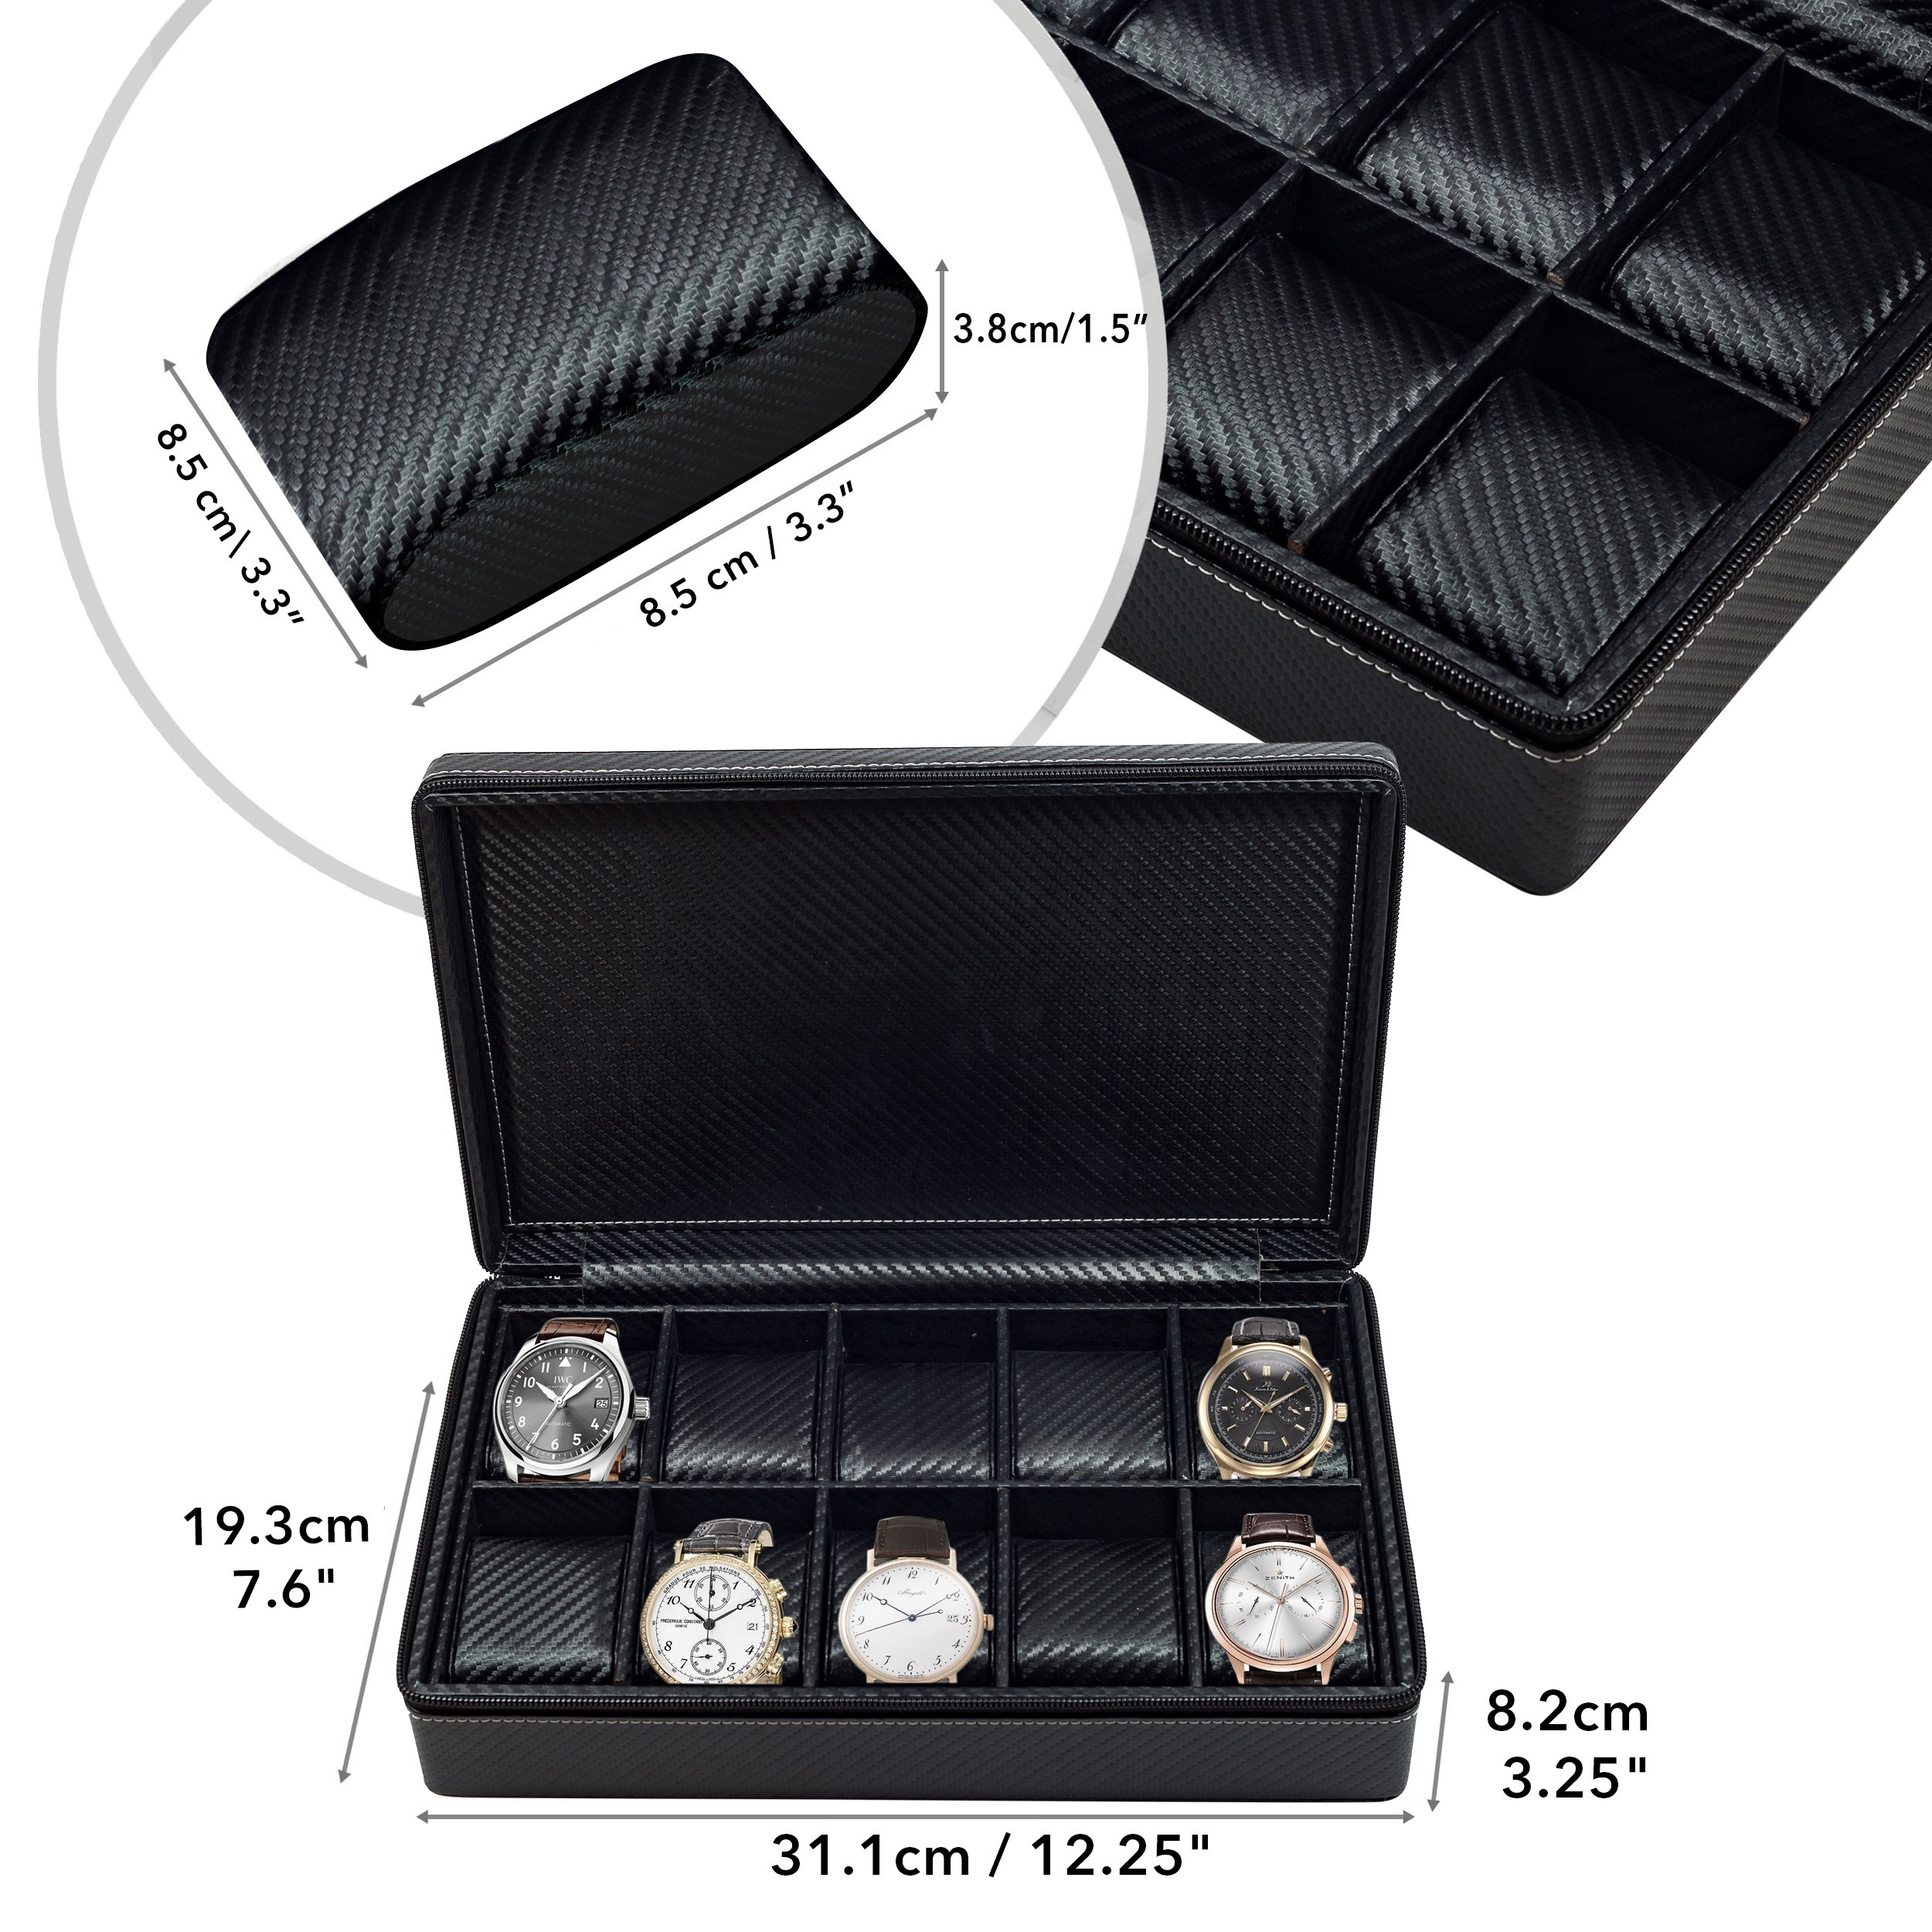 TimelyBuys 10 Watch Briefcase Black Carbon Fiber Zippered Travel Storage Case 50MM Father's Day